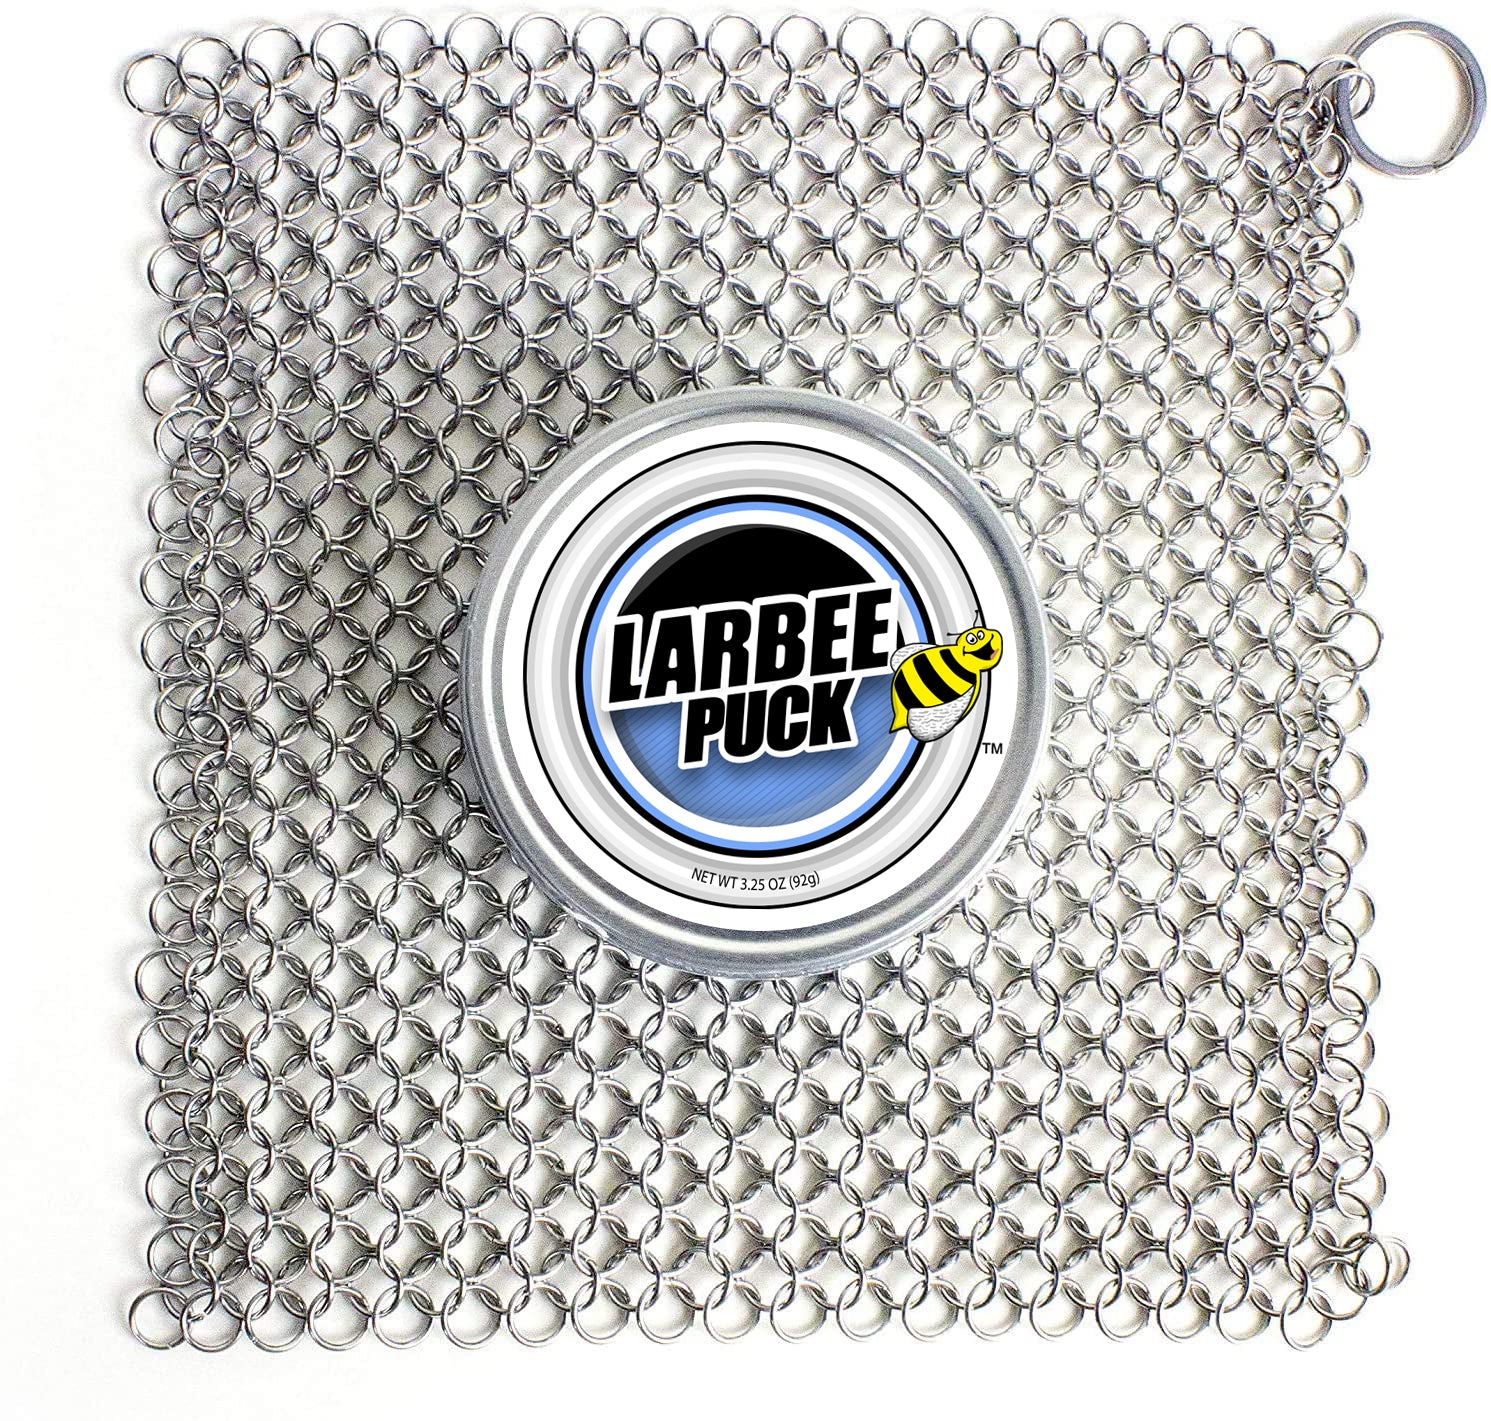 https://crisbee.org/cdn/shop/products/ChainMailScrubberCastIronCleaner_LarbeePuck.jpg?v=1643848870&width=1946